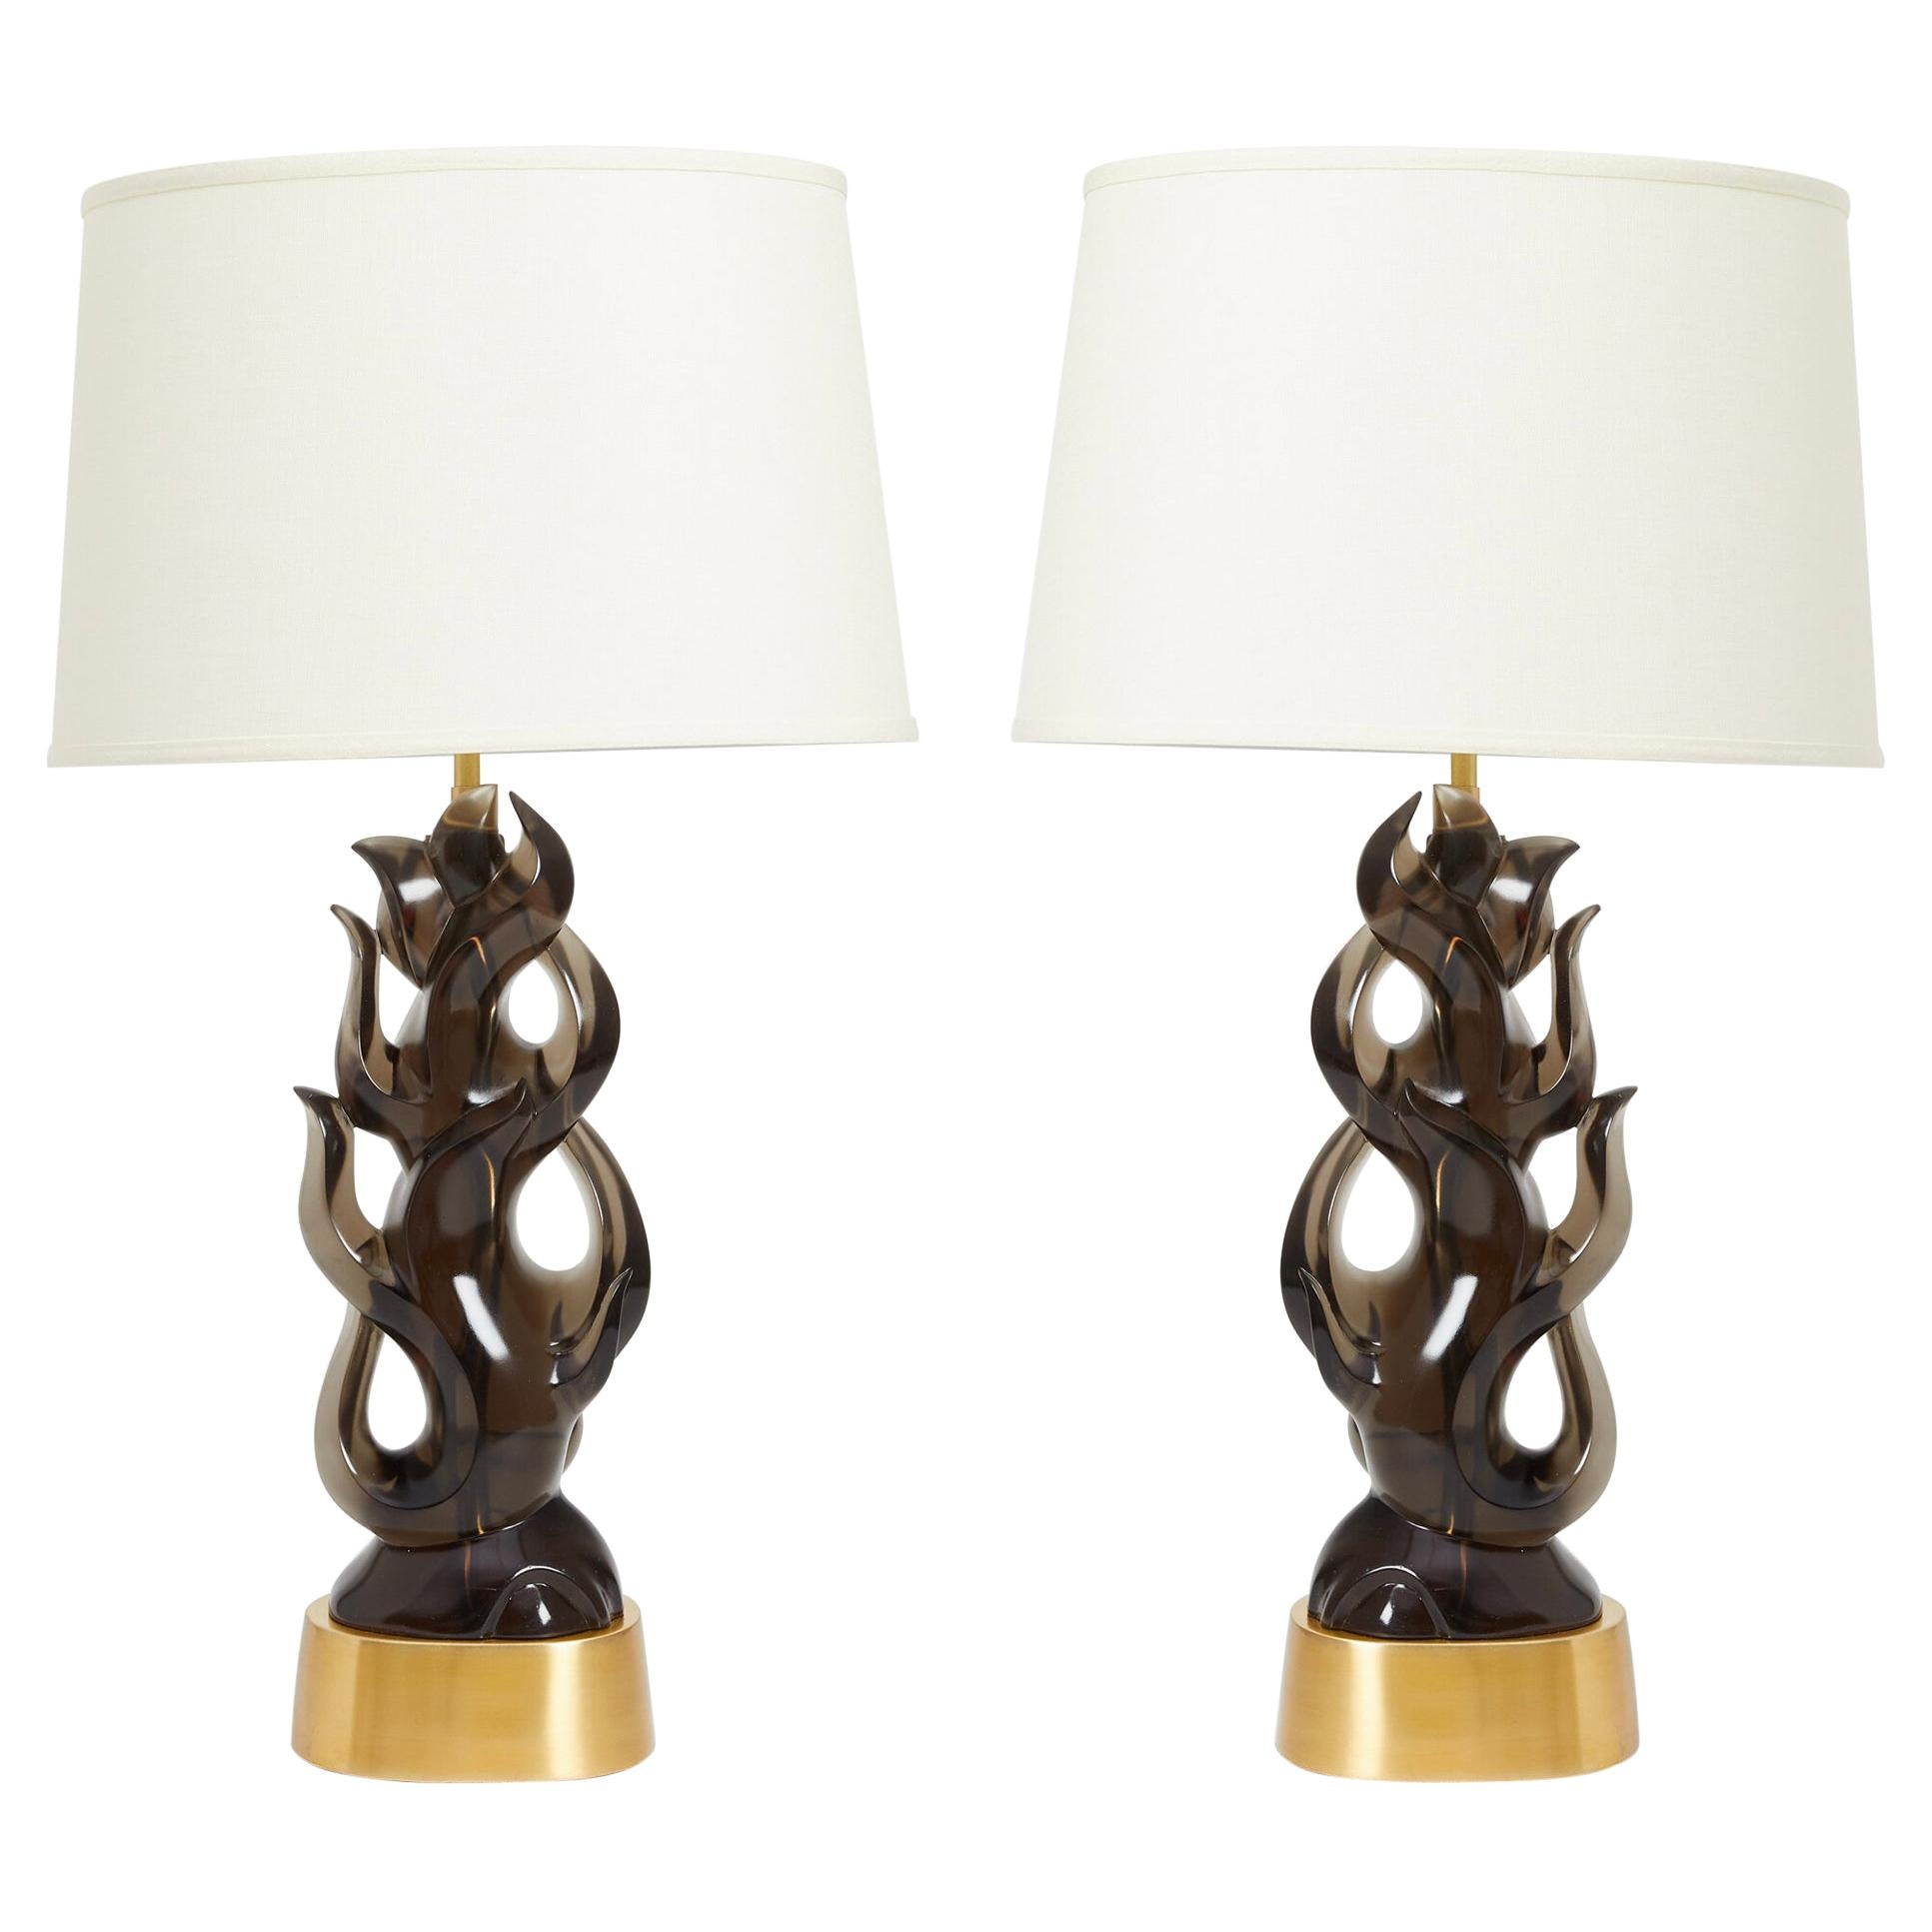 Pair of Candela Lamps in Smoke For Sale